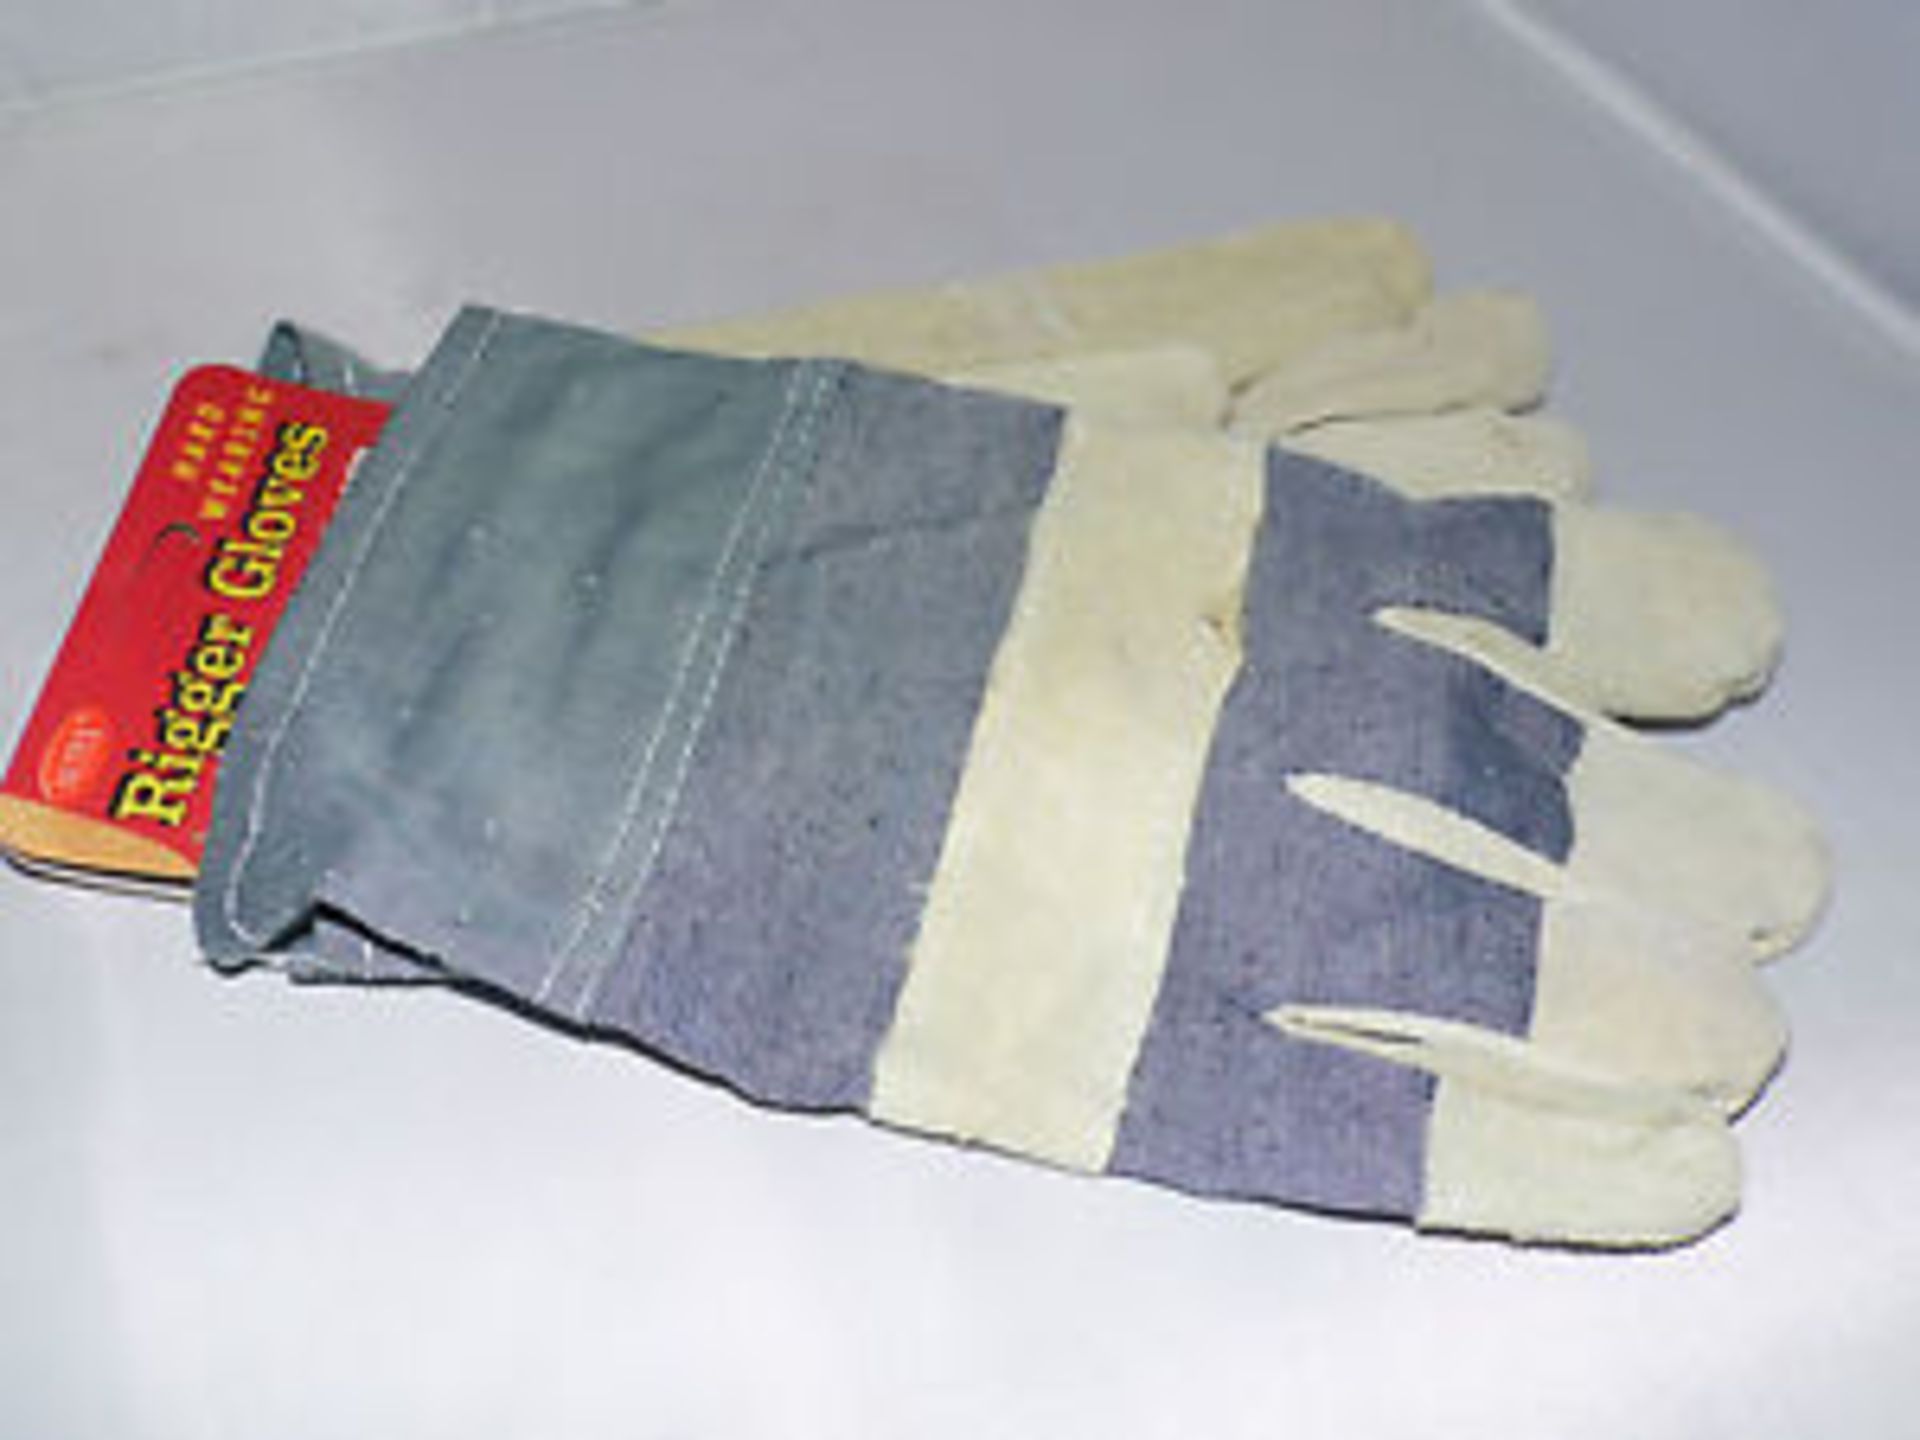 V Brand New 12 Pairs Of Leather Rigger Gloves RRP £59.88 X 2 YOUR BID PRICE TO BE MULTIPLIED BY TWO